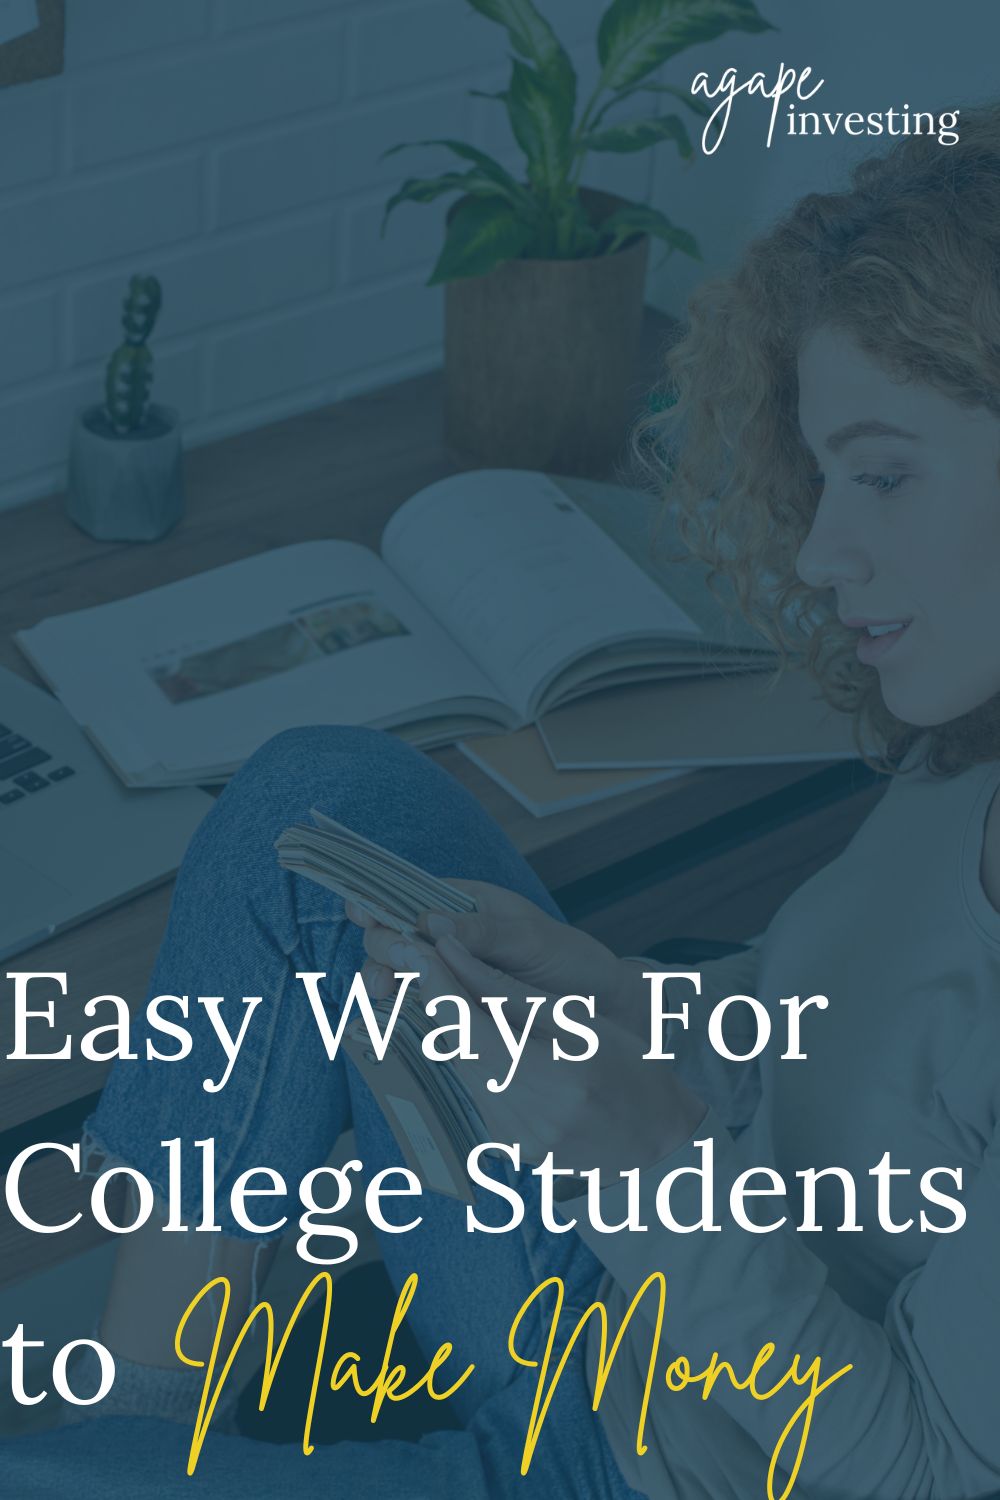 College is a great time to work and earn some extra money! Here are some easy ways for college students to make money in their spare time. 